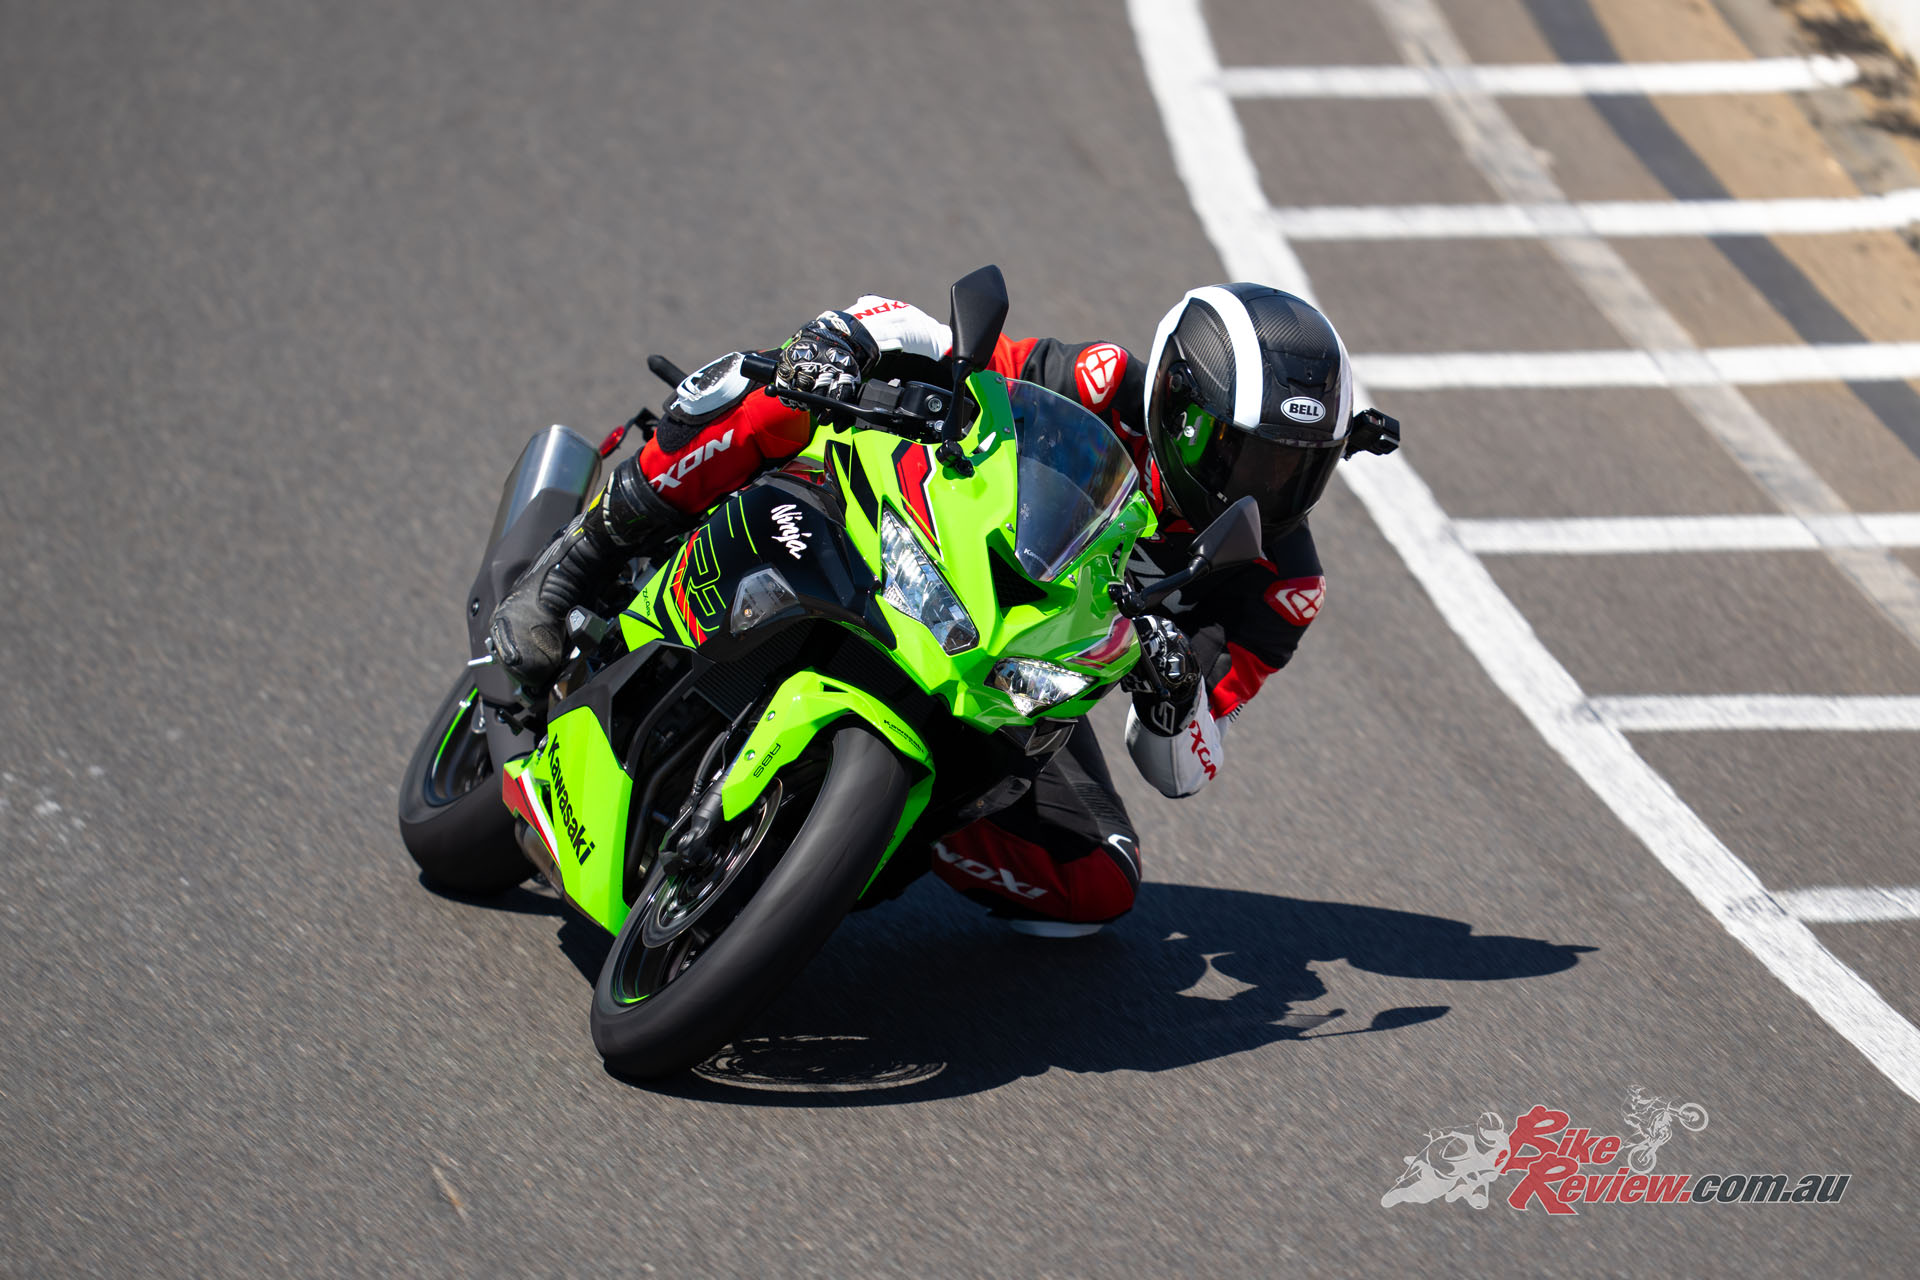 Within half a lap, Zane had enough confidence in the ZX-4RR to put the hammer down...